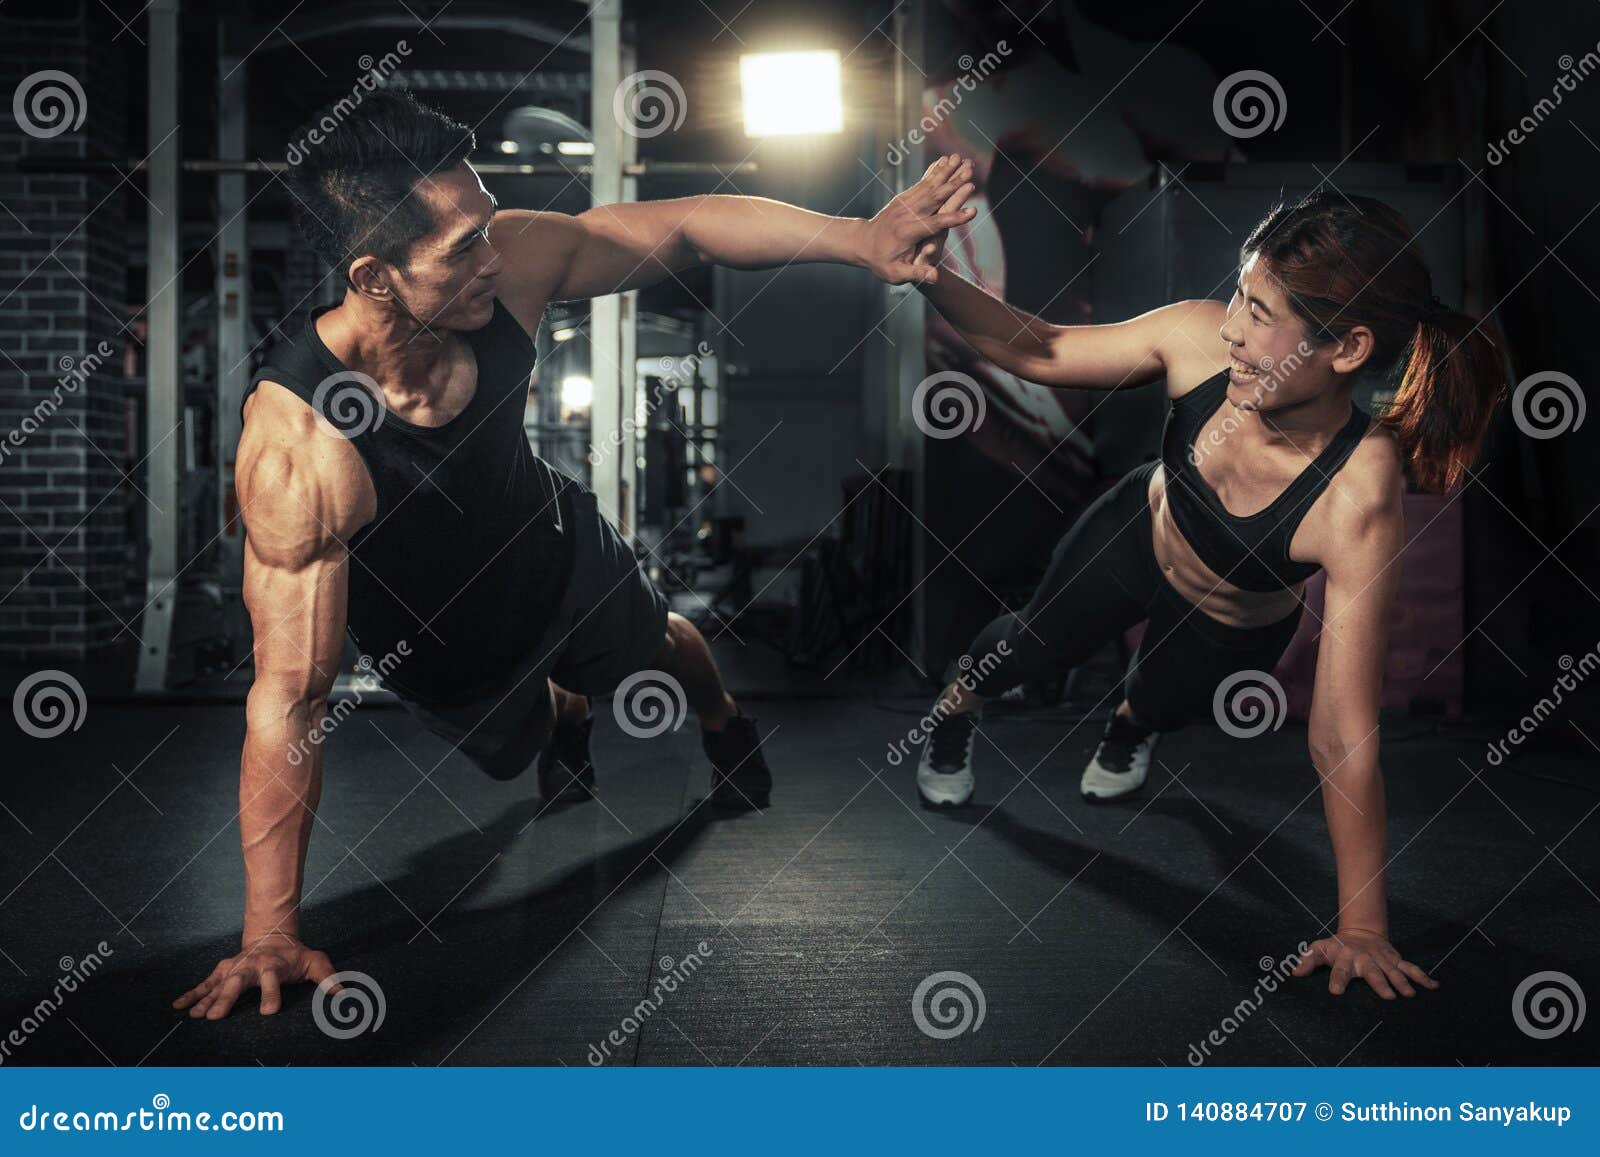 young sporty couple working out together at gym, fitness man and woman giving each other a high five after the training session in